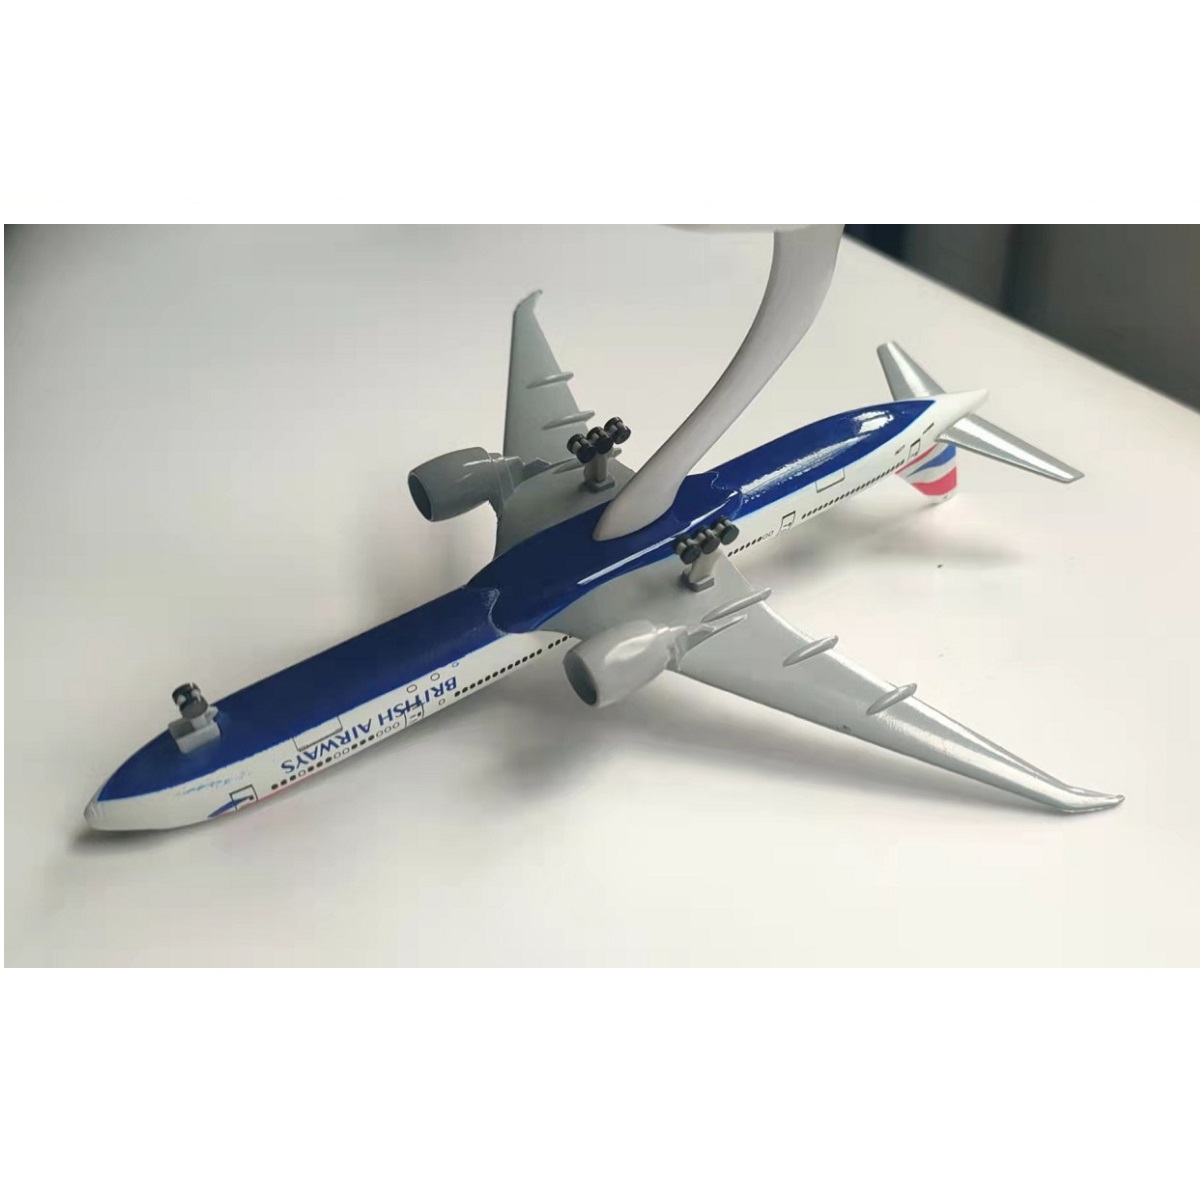 British Airways Airbus A380 Replica Toy Model with Stand Diecast Alloy with ABS plastic parts